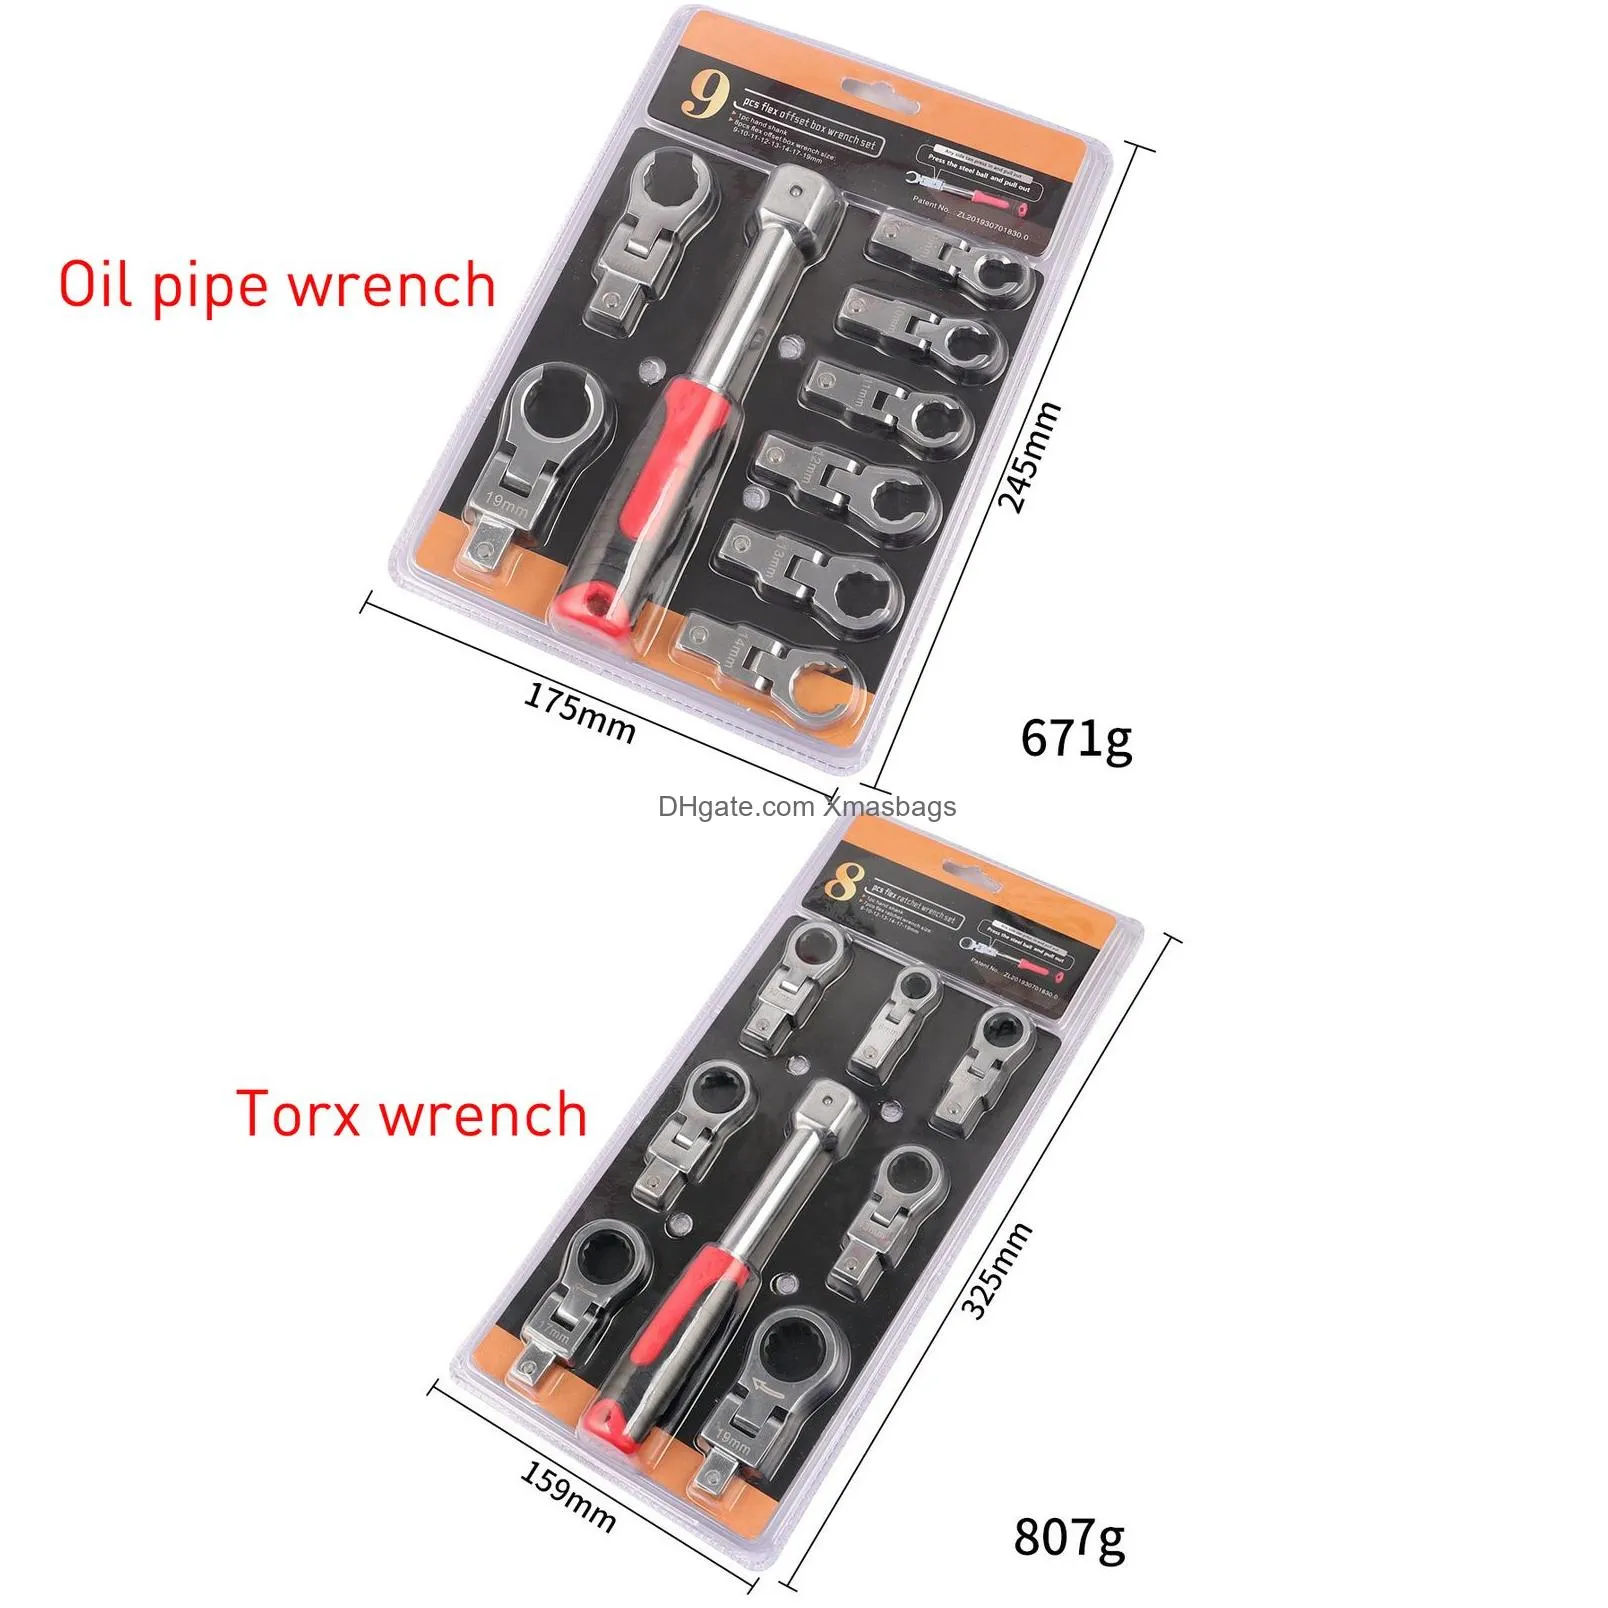 screwdrivers portable ratchet wrench 72 gear shaking head interchangeable combination set rotatable 180 °removable flexible torque spanner